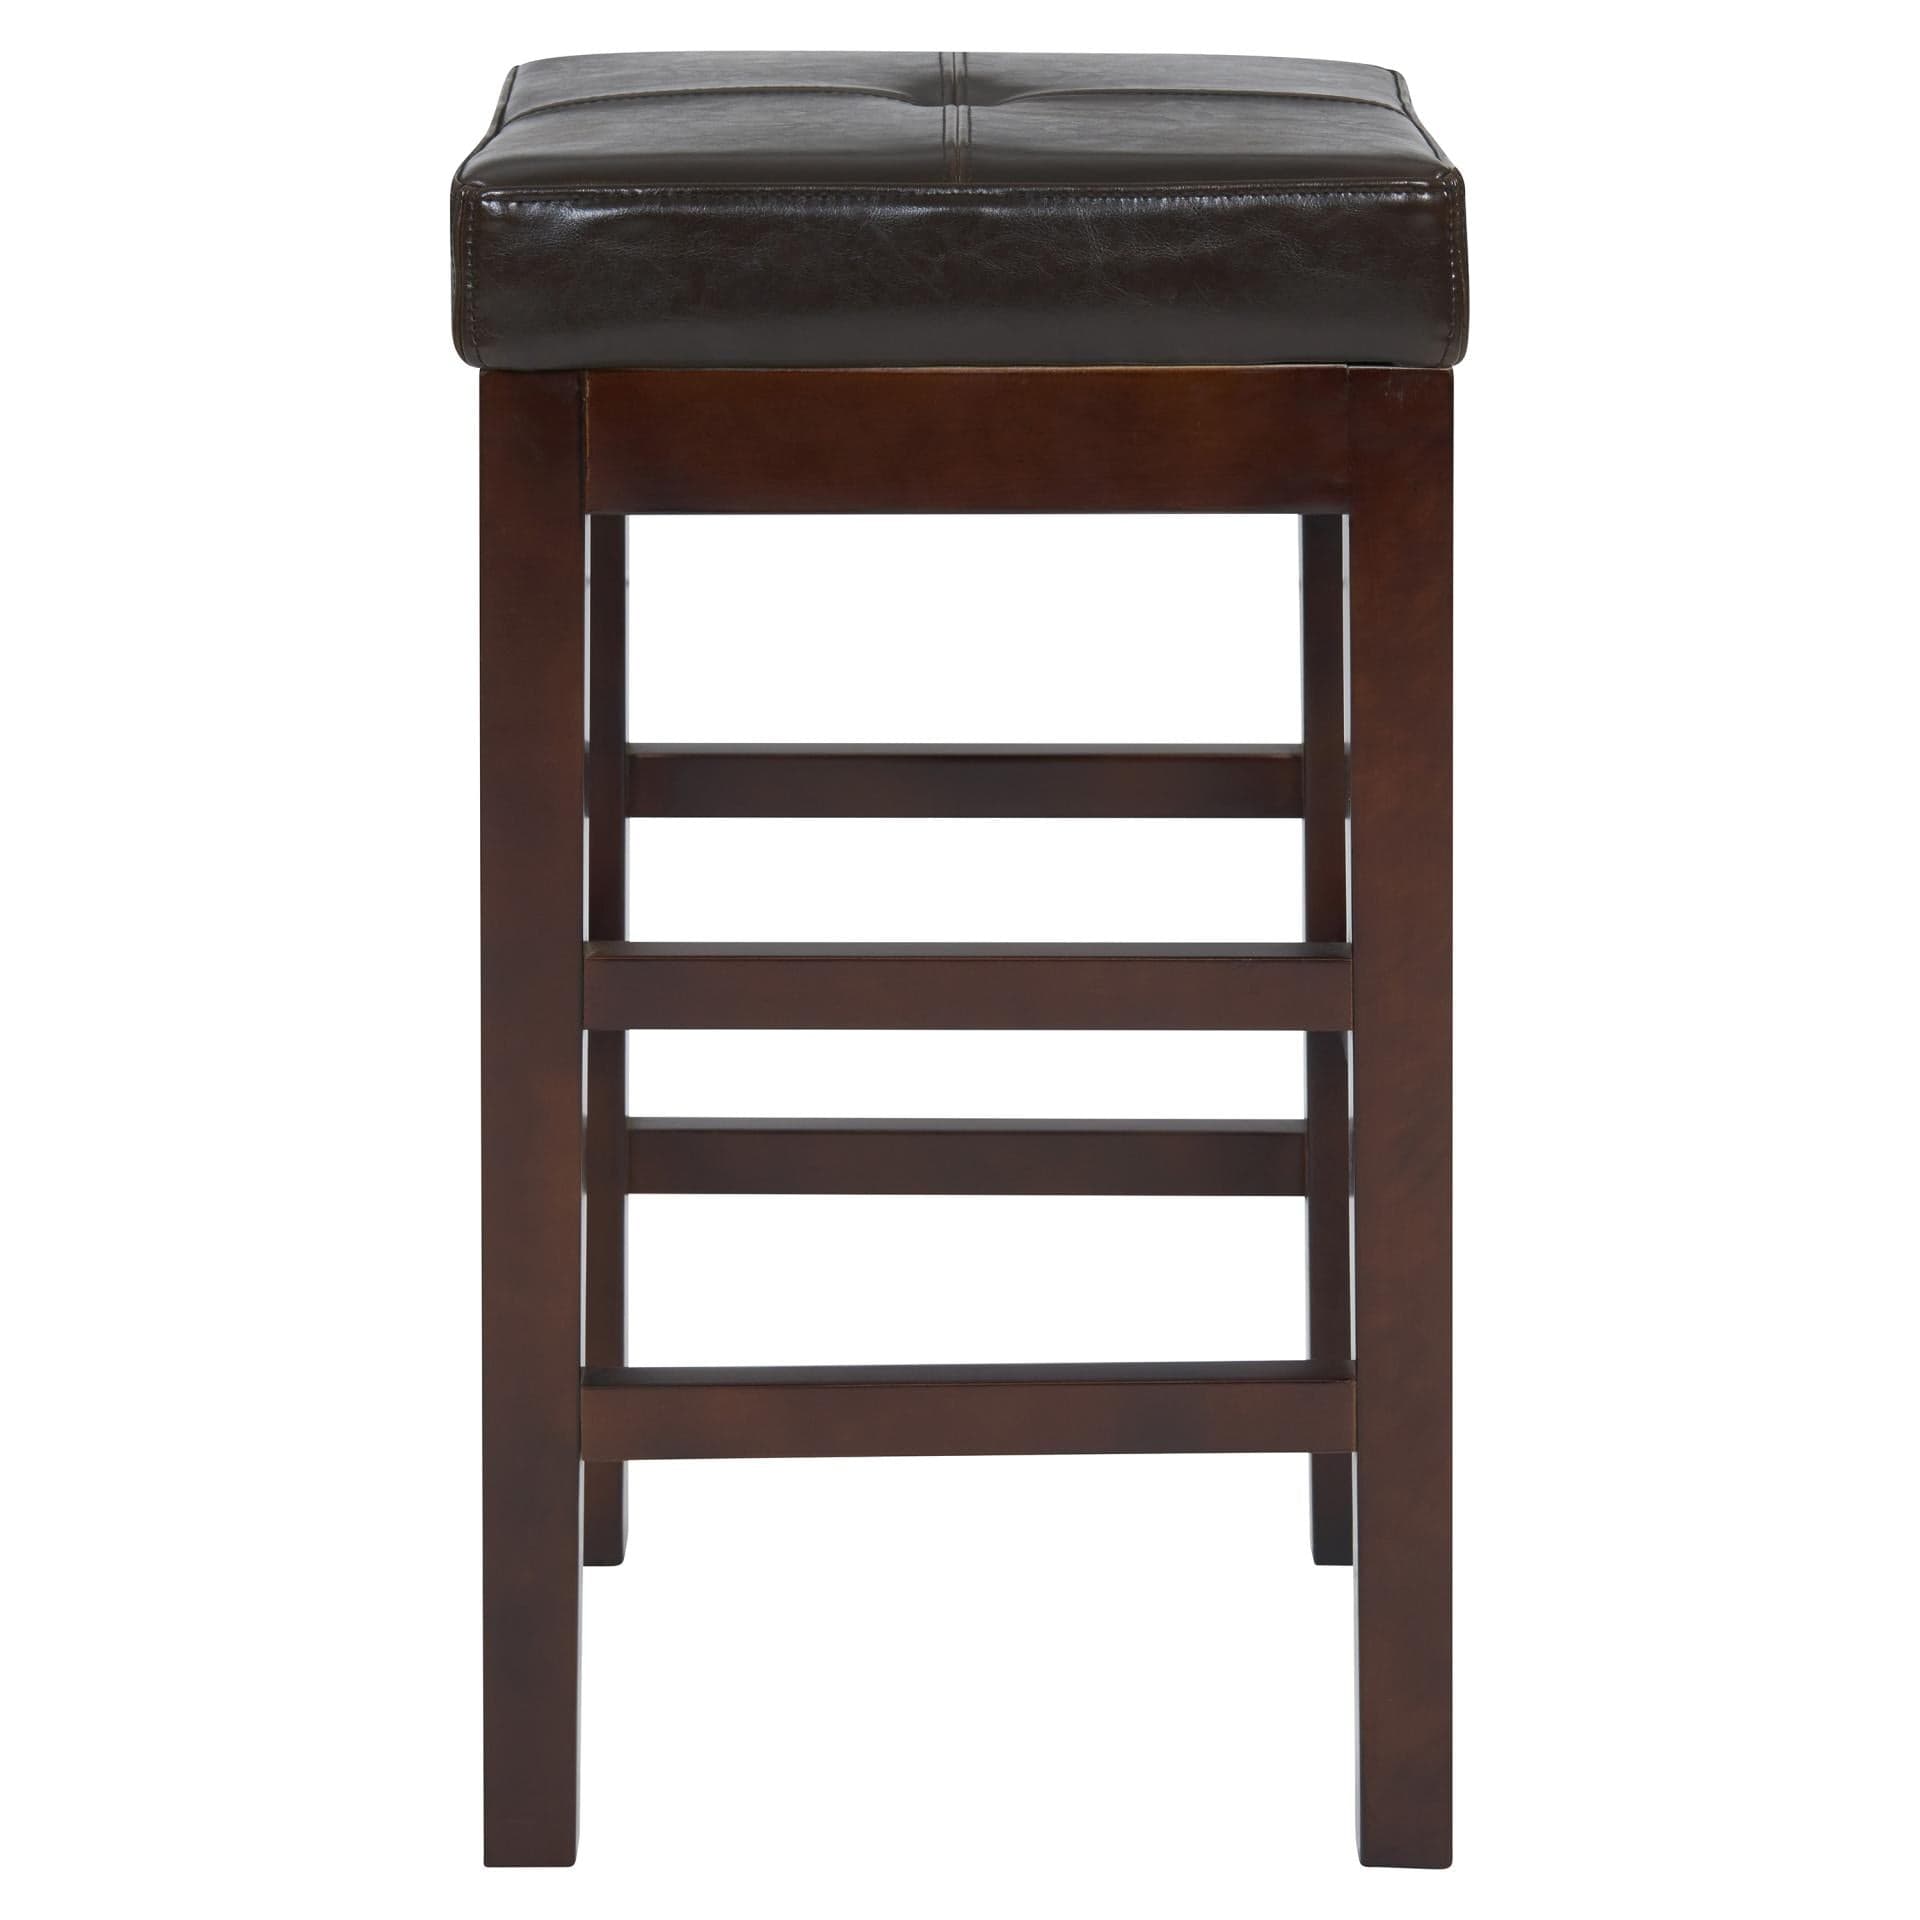 NPD Barstool NPD - Valencia Backless Leather Counter Stool, Brown | 108627-01